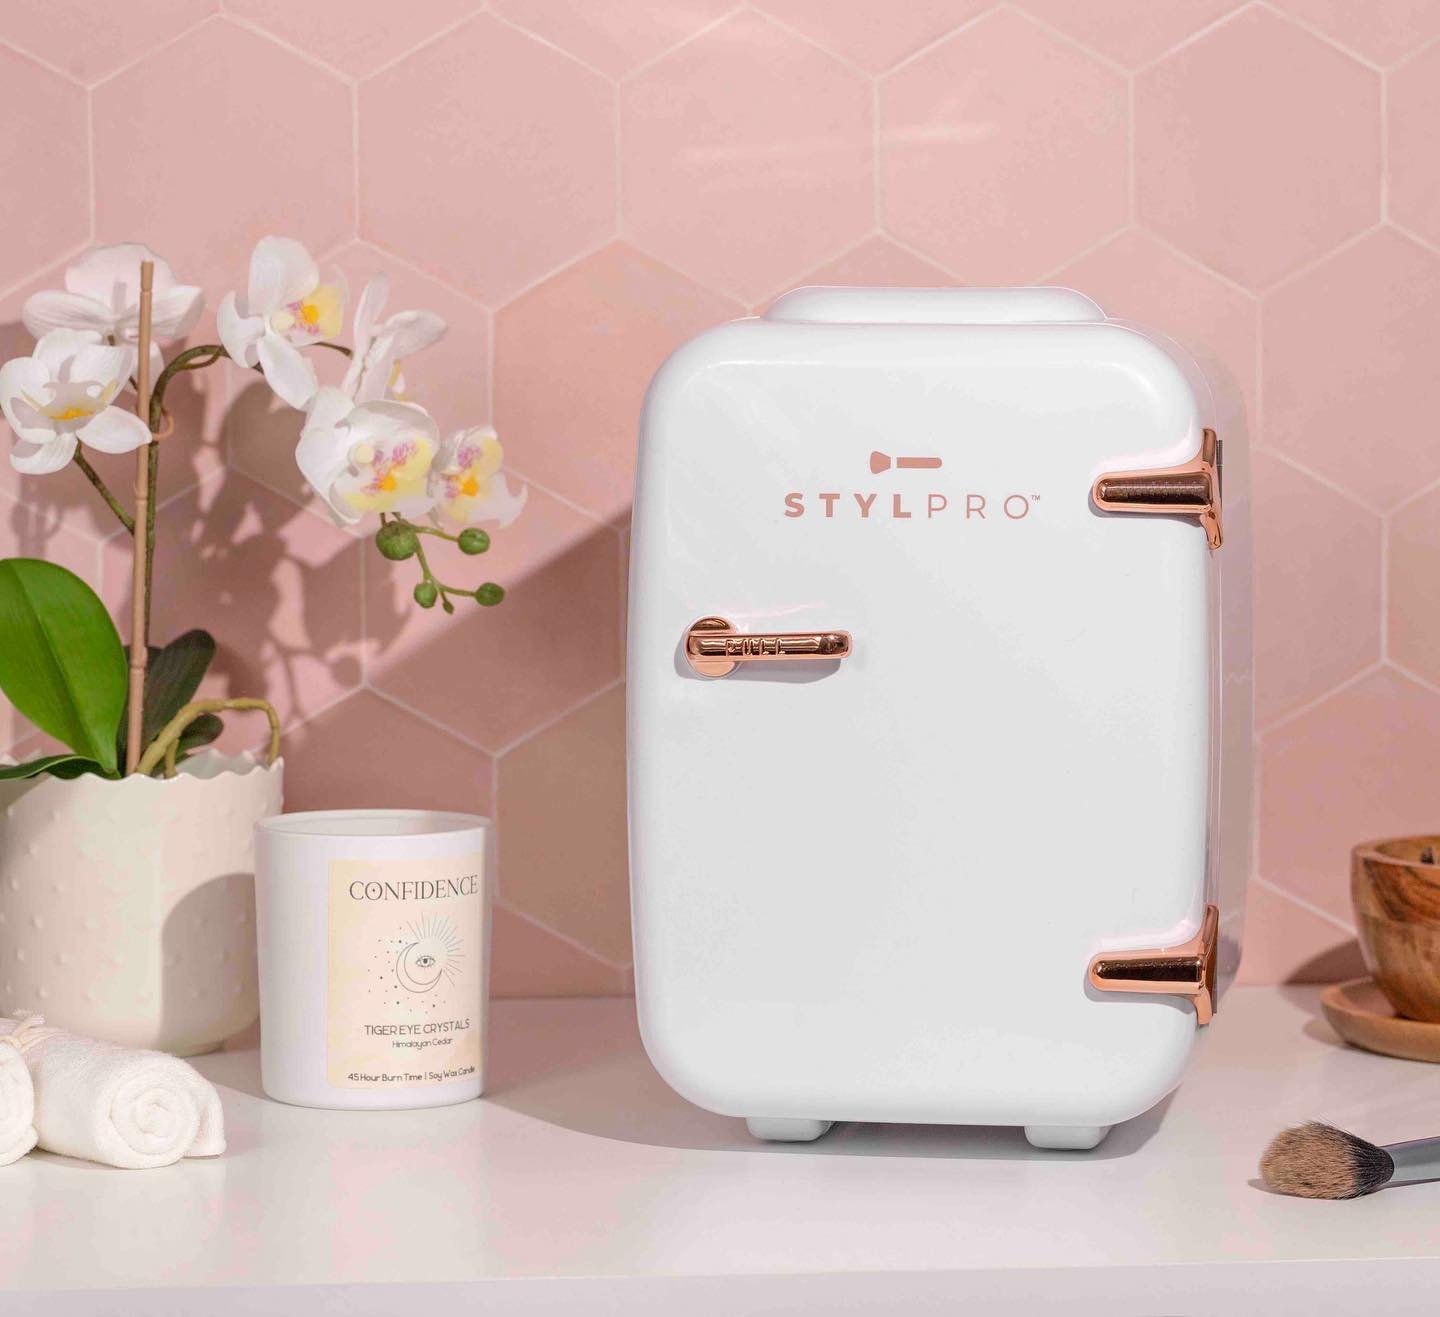 Fab Find of the Week: @stylpro_uk Beauty Fridge 💫

There are all sorts of reasons to keep your cosmetics refrigerated. 

First off, to preserve their lifespan &ndash; particularly important for fragrances, by the way, but invaluable if you make your